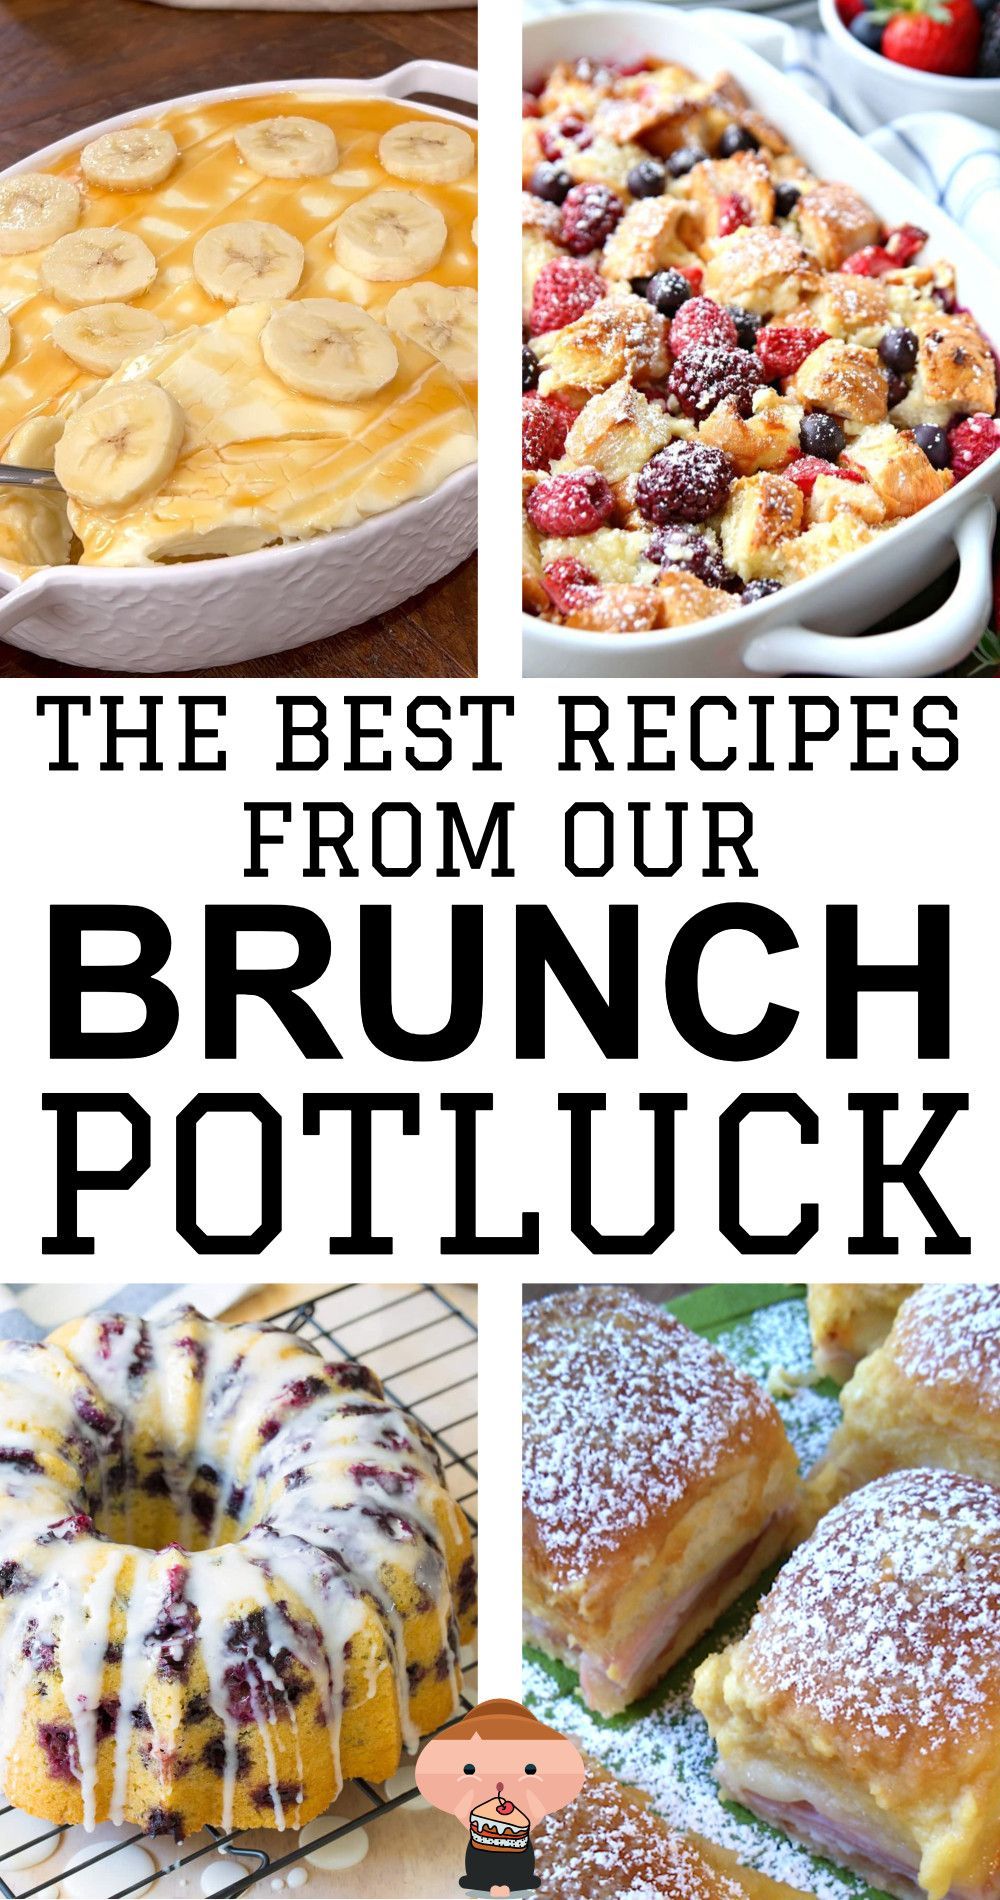 The best recipes from our brunch potluck